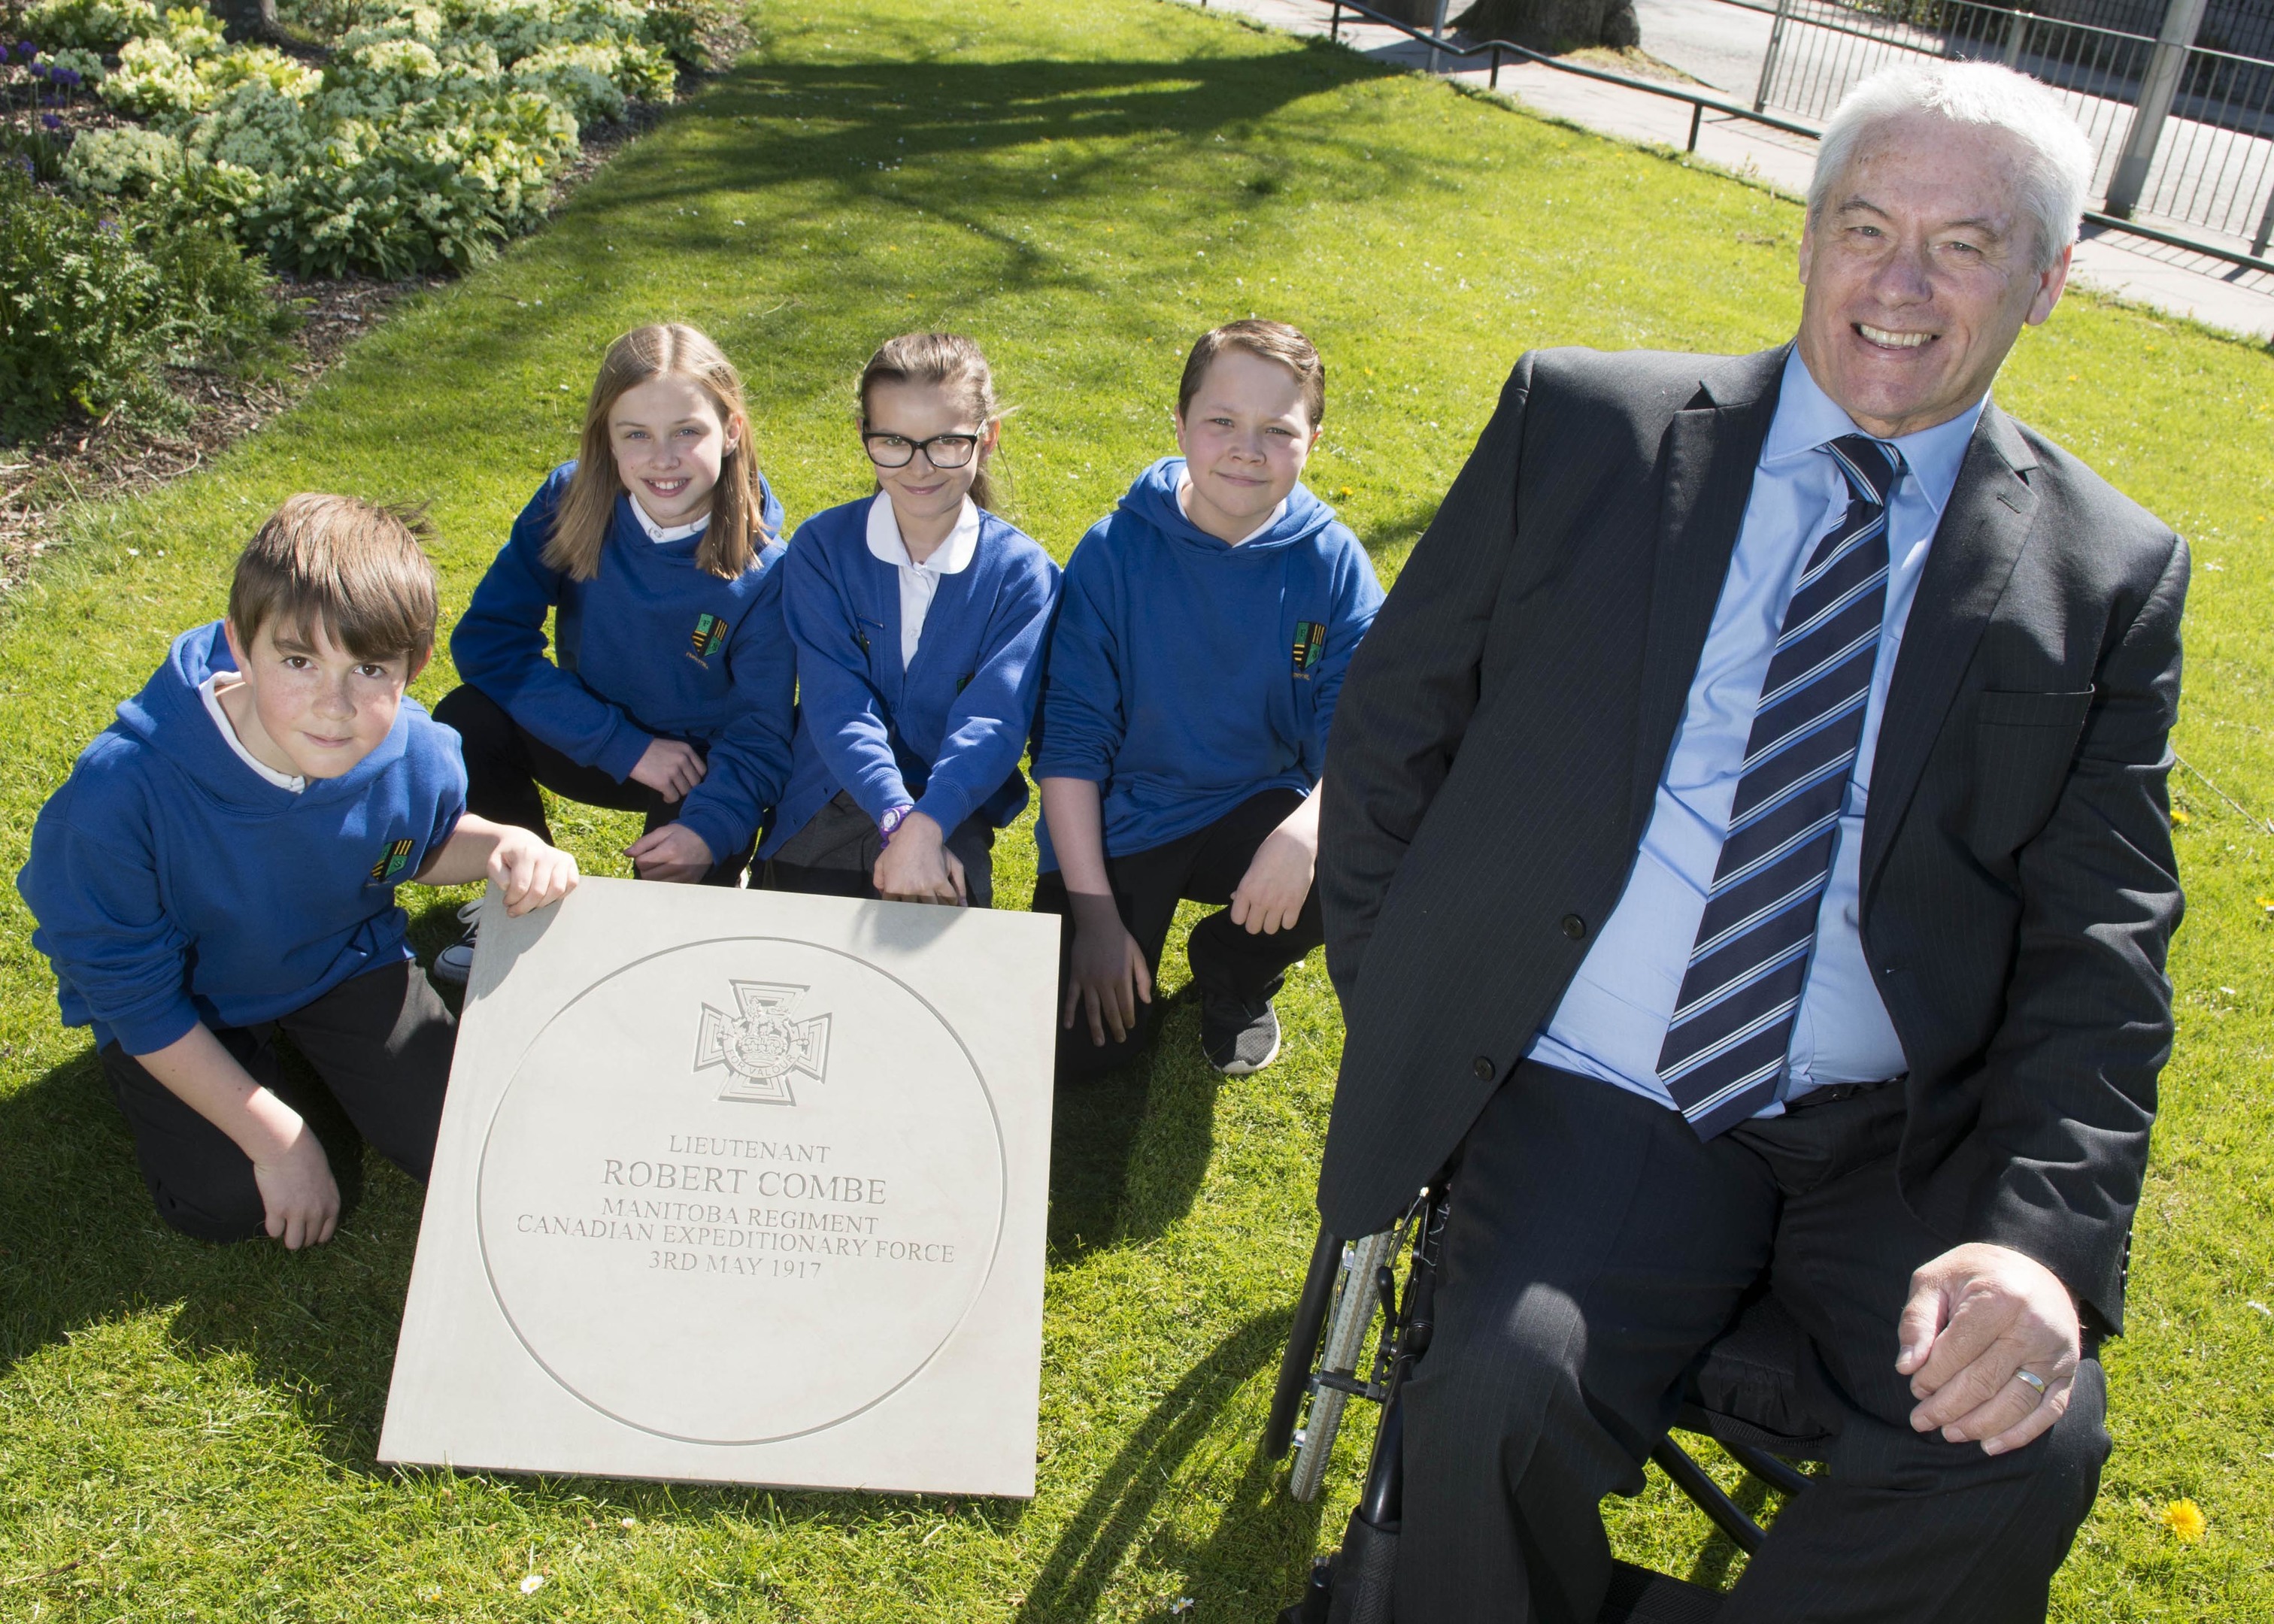 03/05/17 Vice Lord Lieutenant Andrew Lawtie with Ferryhill Primary School House captains- pupils L-R Matthew Wheeler, Bryony Anderson, Alexane Wood, and Kieran Thomson, all 11YO pr7

A commemorative stone was laid in Aberdeen today (Wednesday 3 May) to mark the centenary of the death of First World War Victoria Cross recipient Robert Grierson Combe.Born on Holburn Road, Aberdeen in 1880, Robert Combe attended Ferryhill School and Aberdeen Grammar School before taking up an apprenticeship as a pharmacist.  He emigrated to Canada in 1906 where he opened his own pharmacy business in Melville, Saskatchewan before enlisting in the Canadian Expeditionary Force.